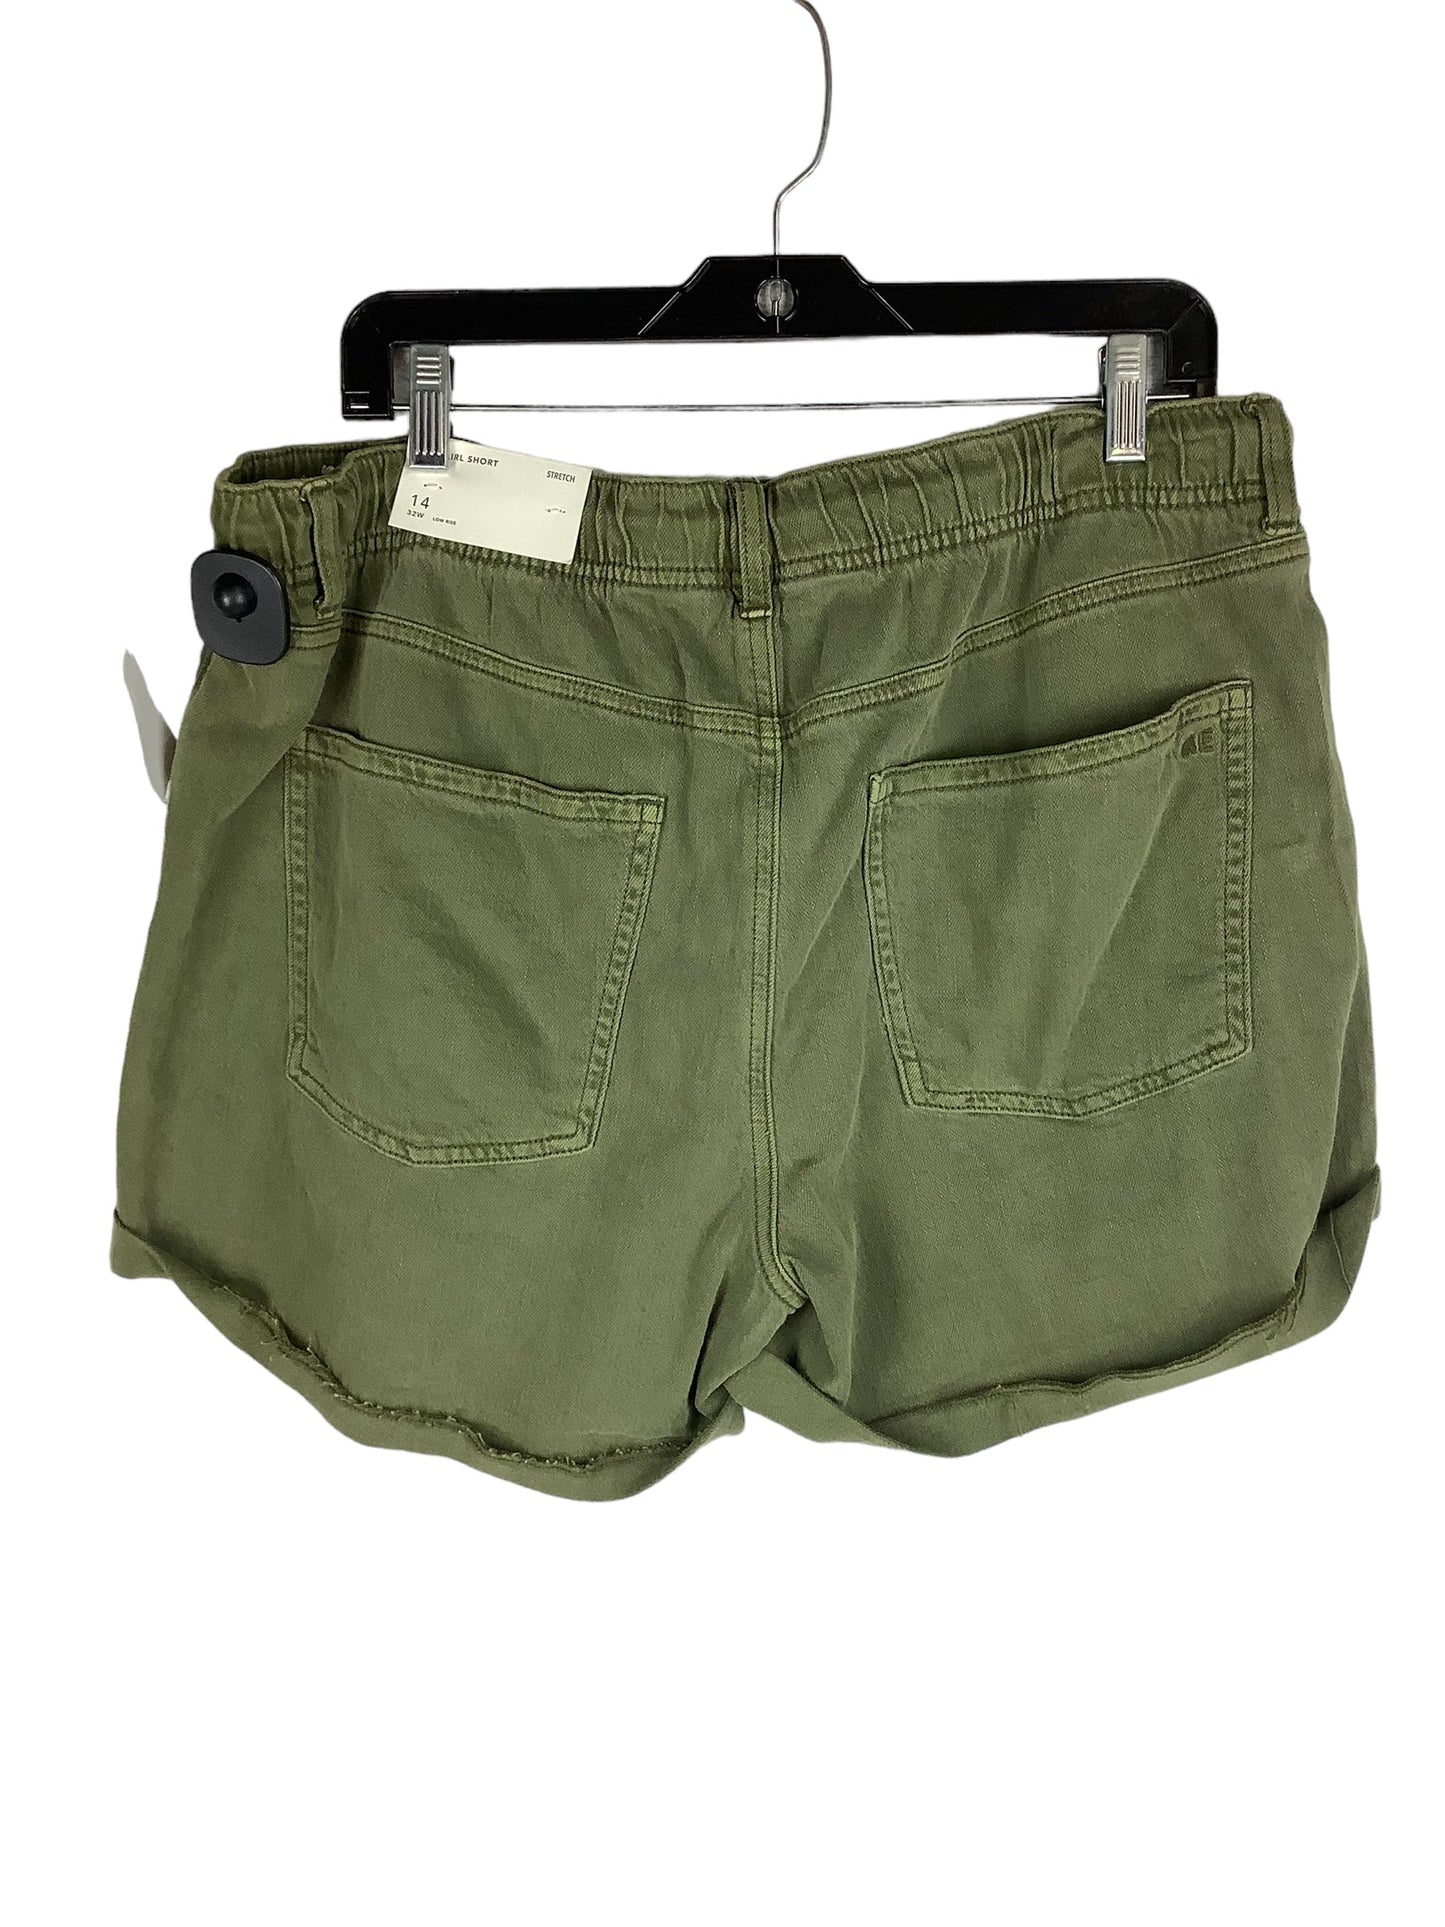 Green Shorts American Eagle, Size 14